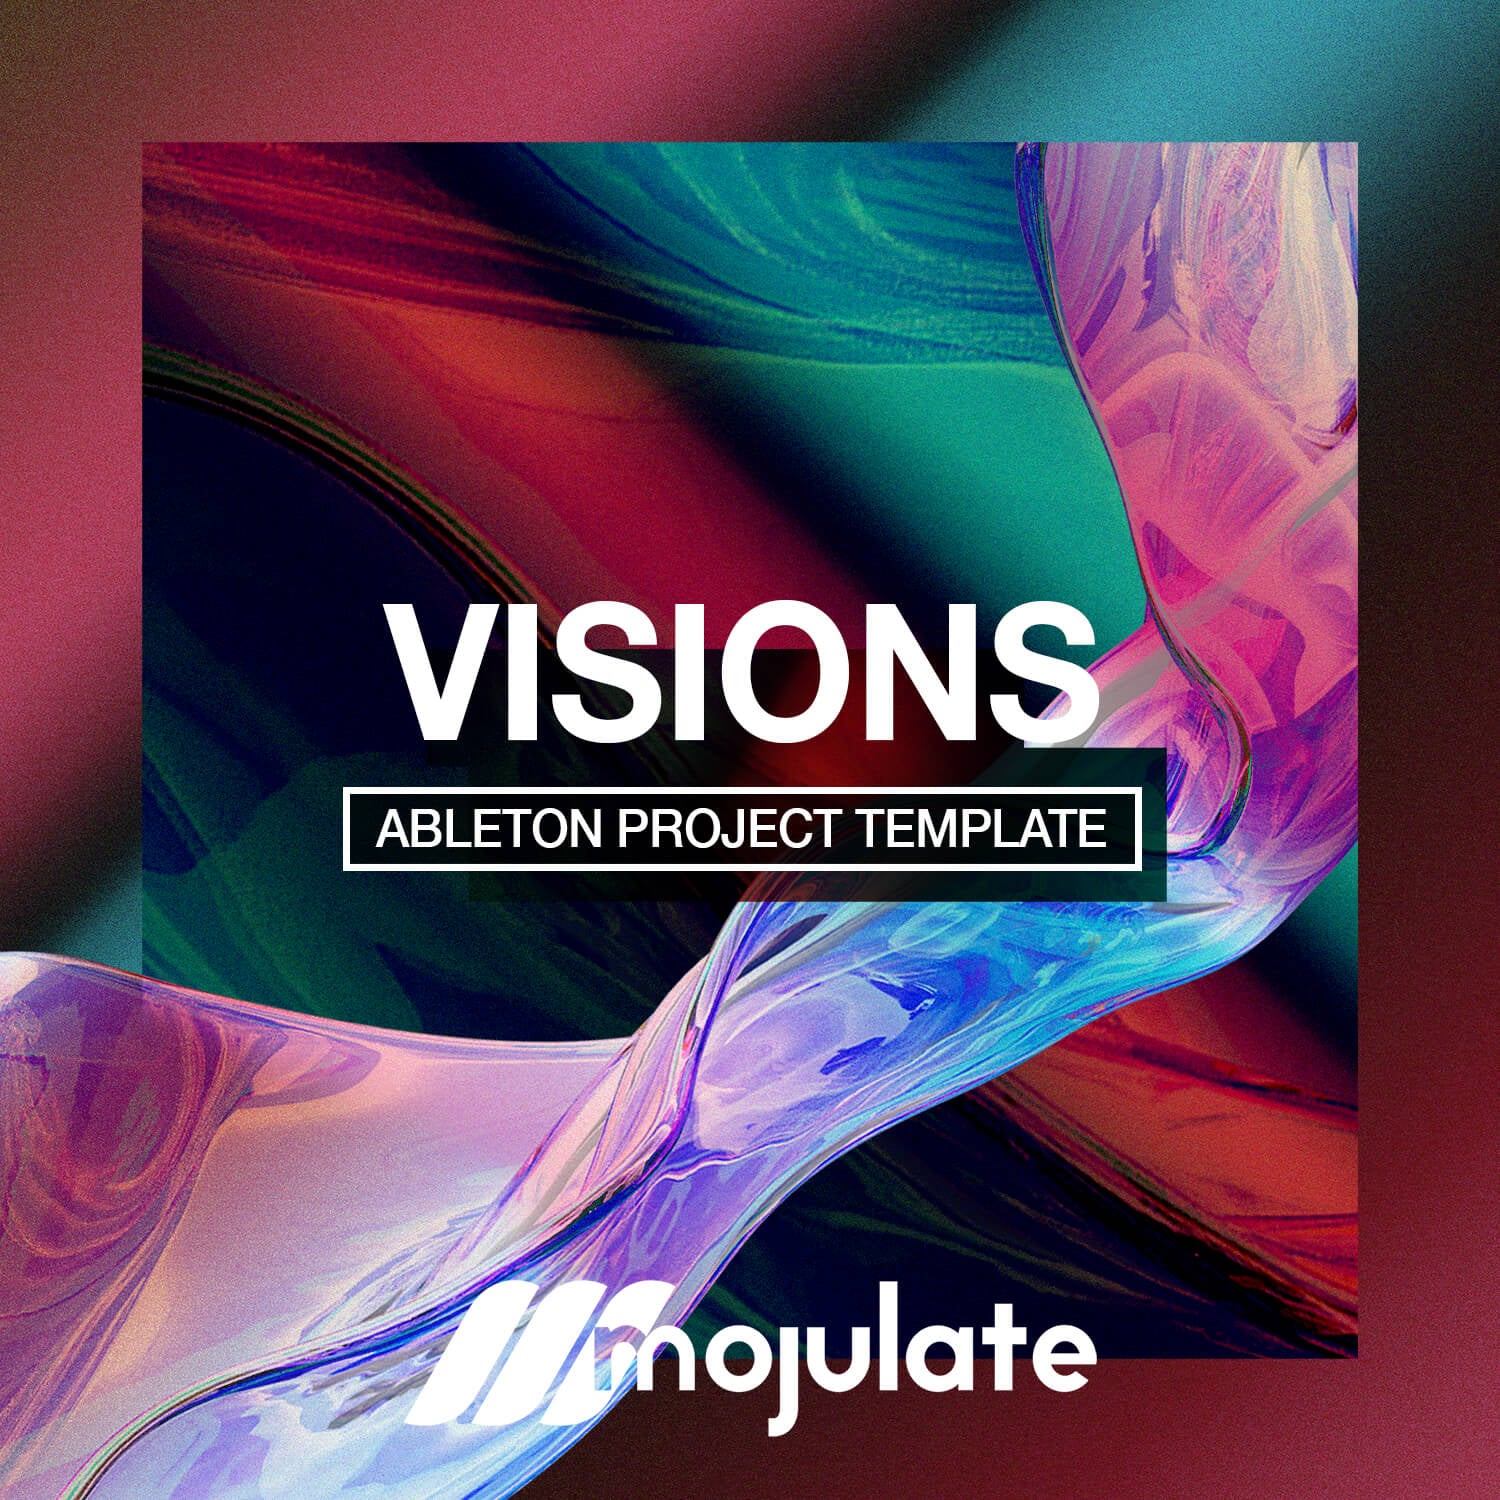 Visions | Ableton Project Template